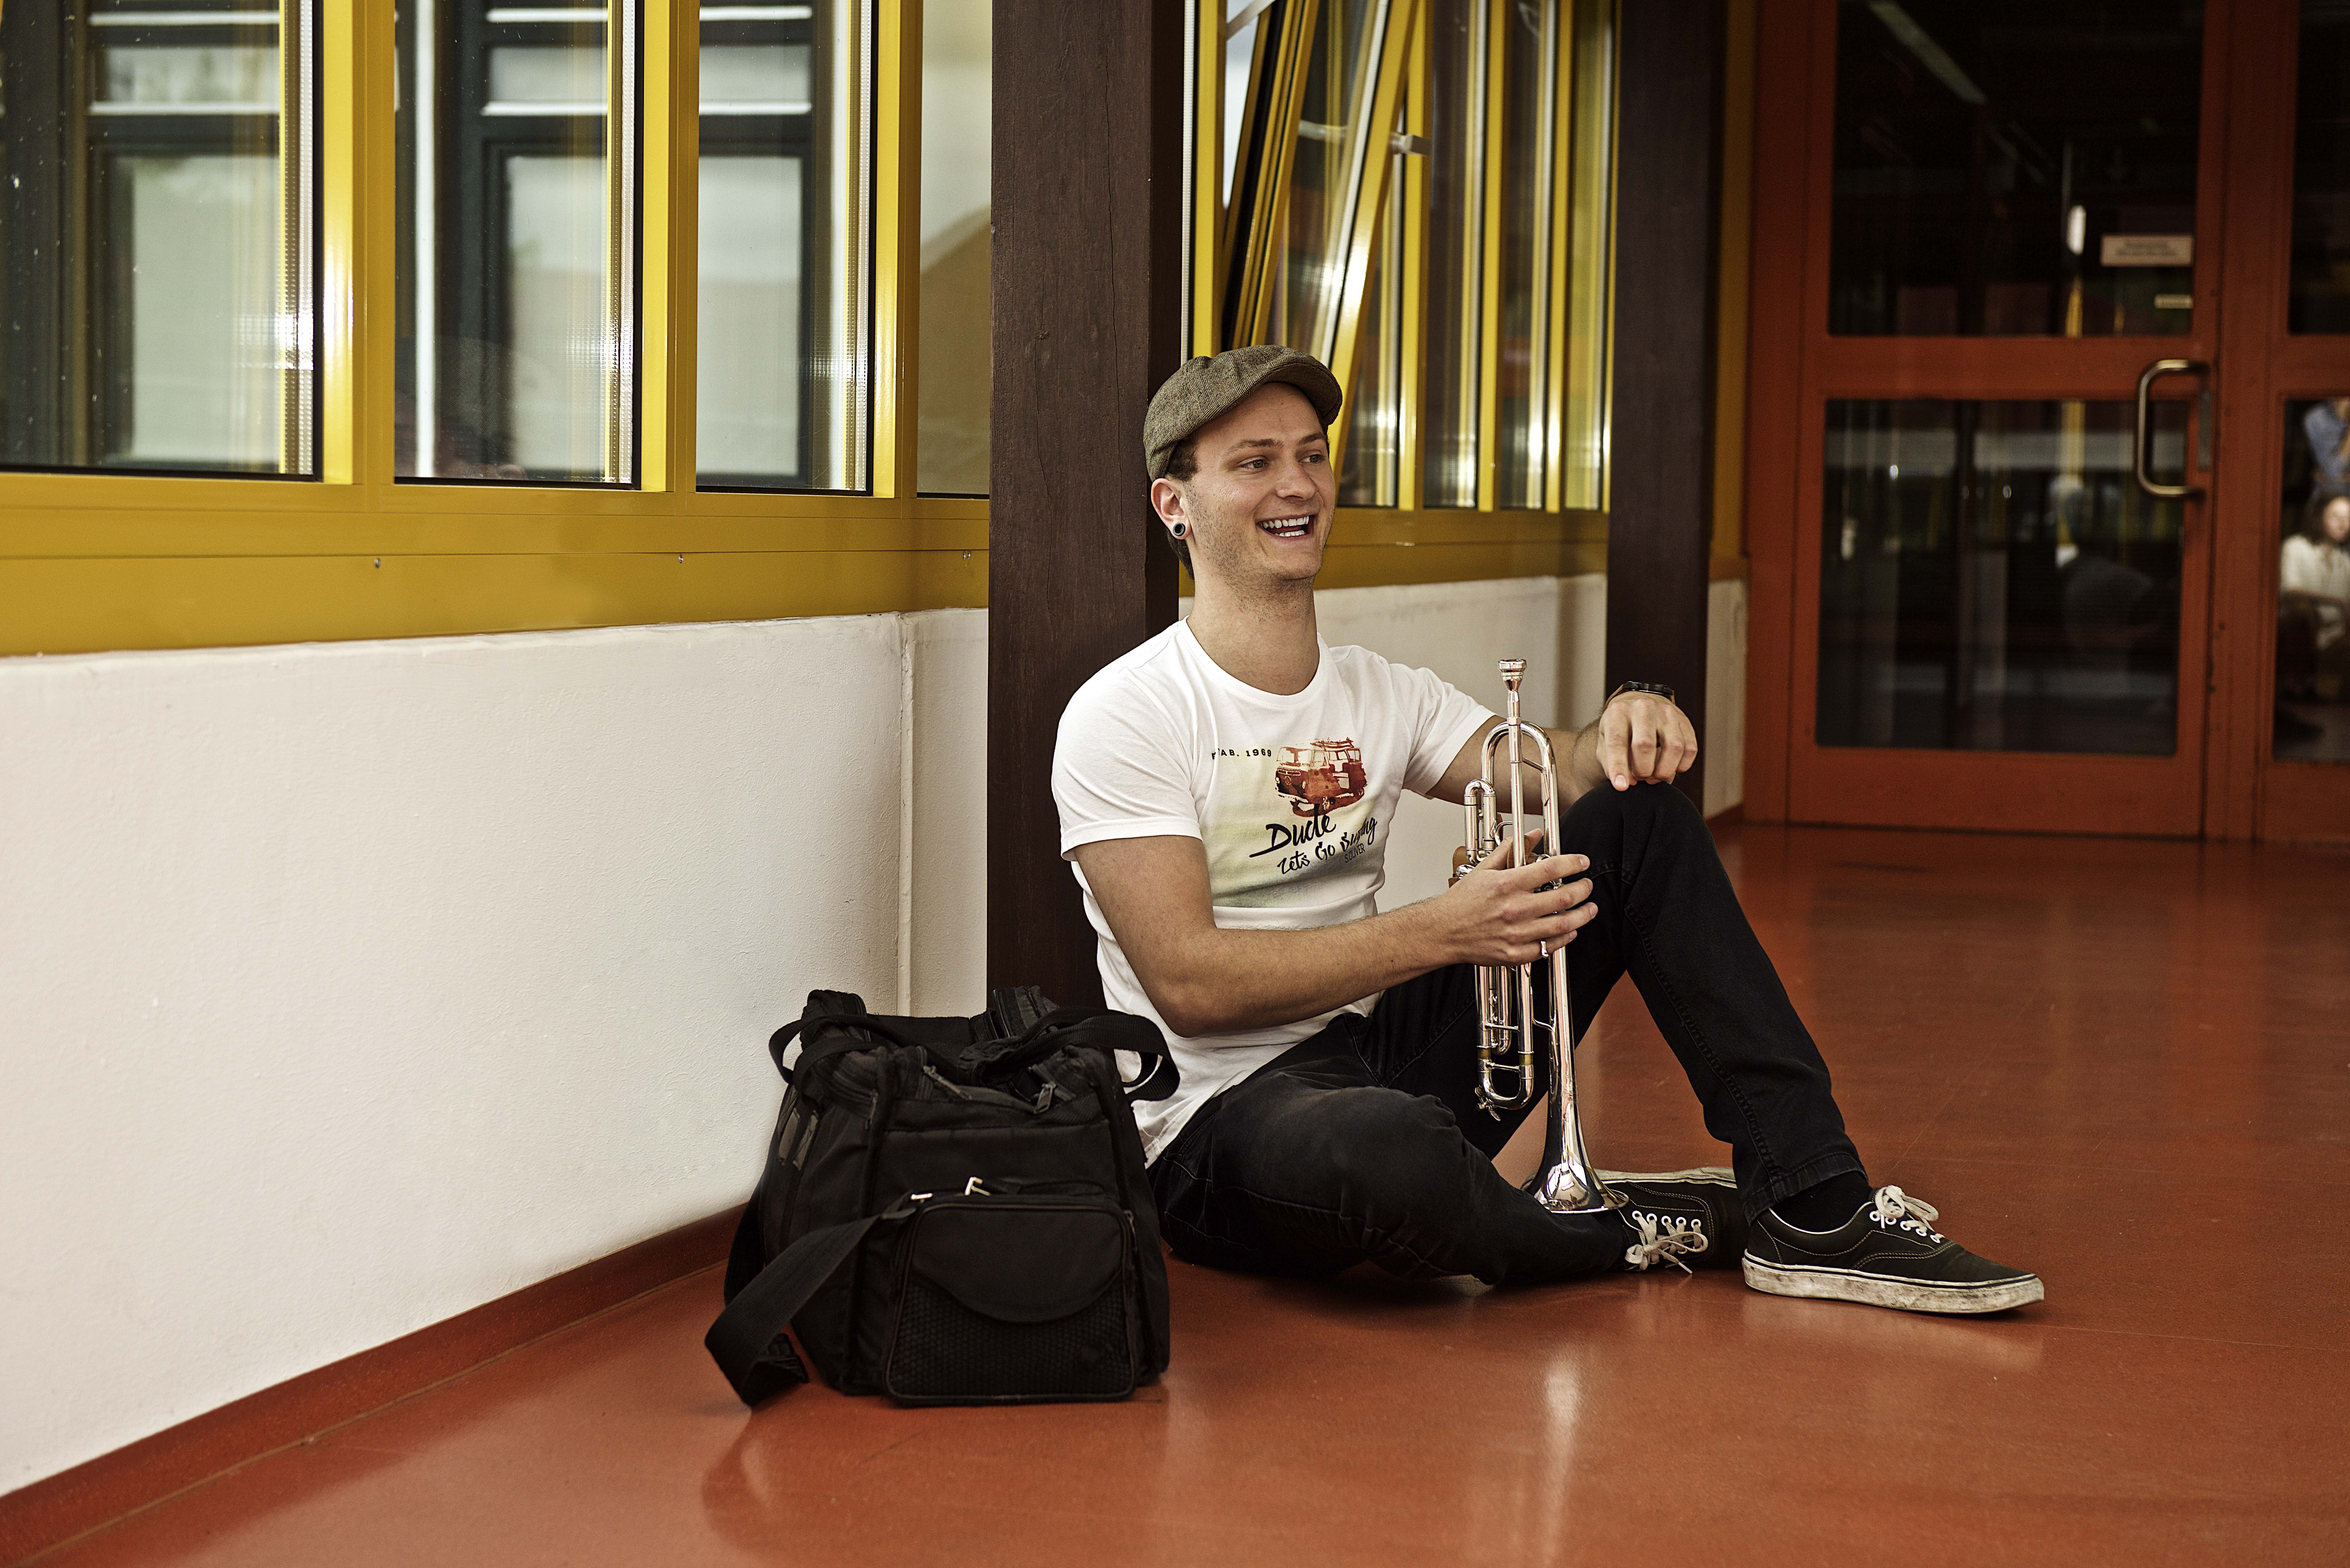 A student with an instrument, out and about at the university